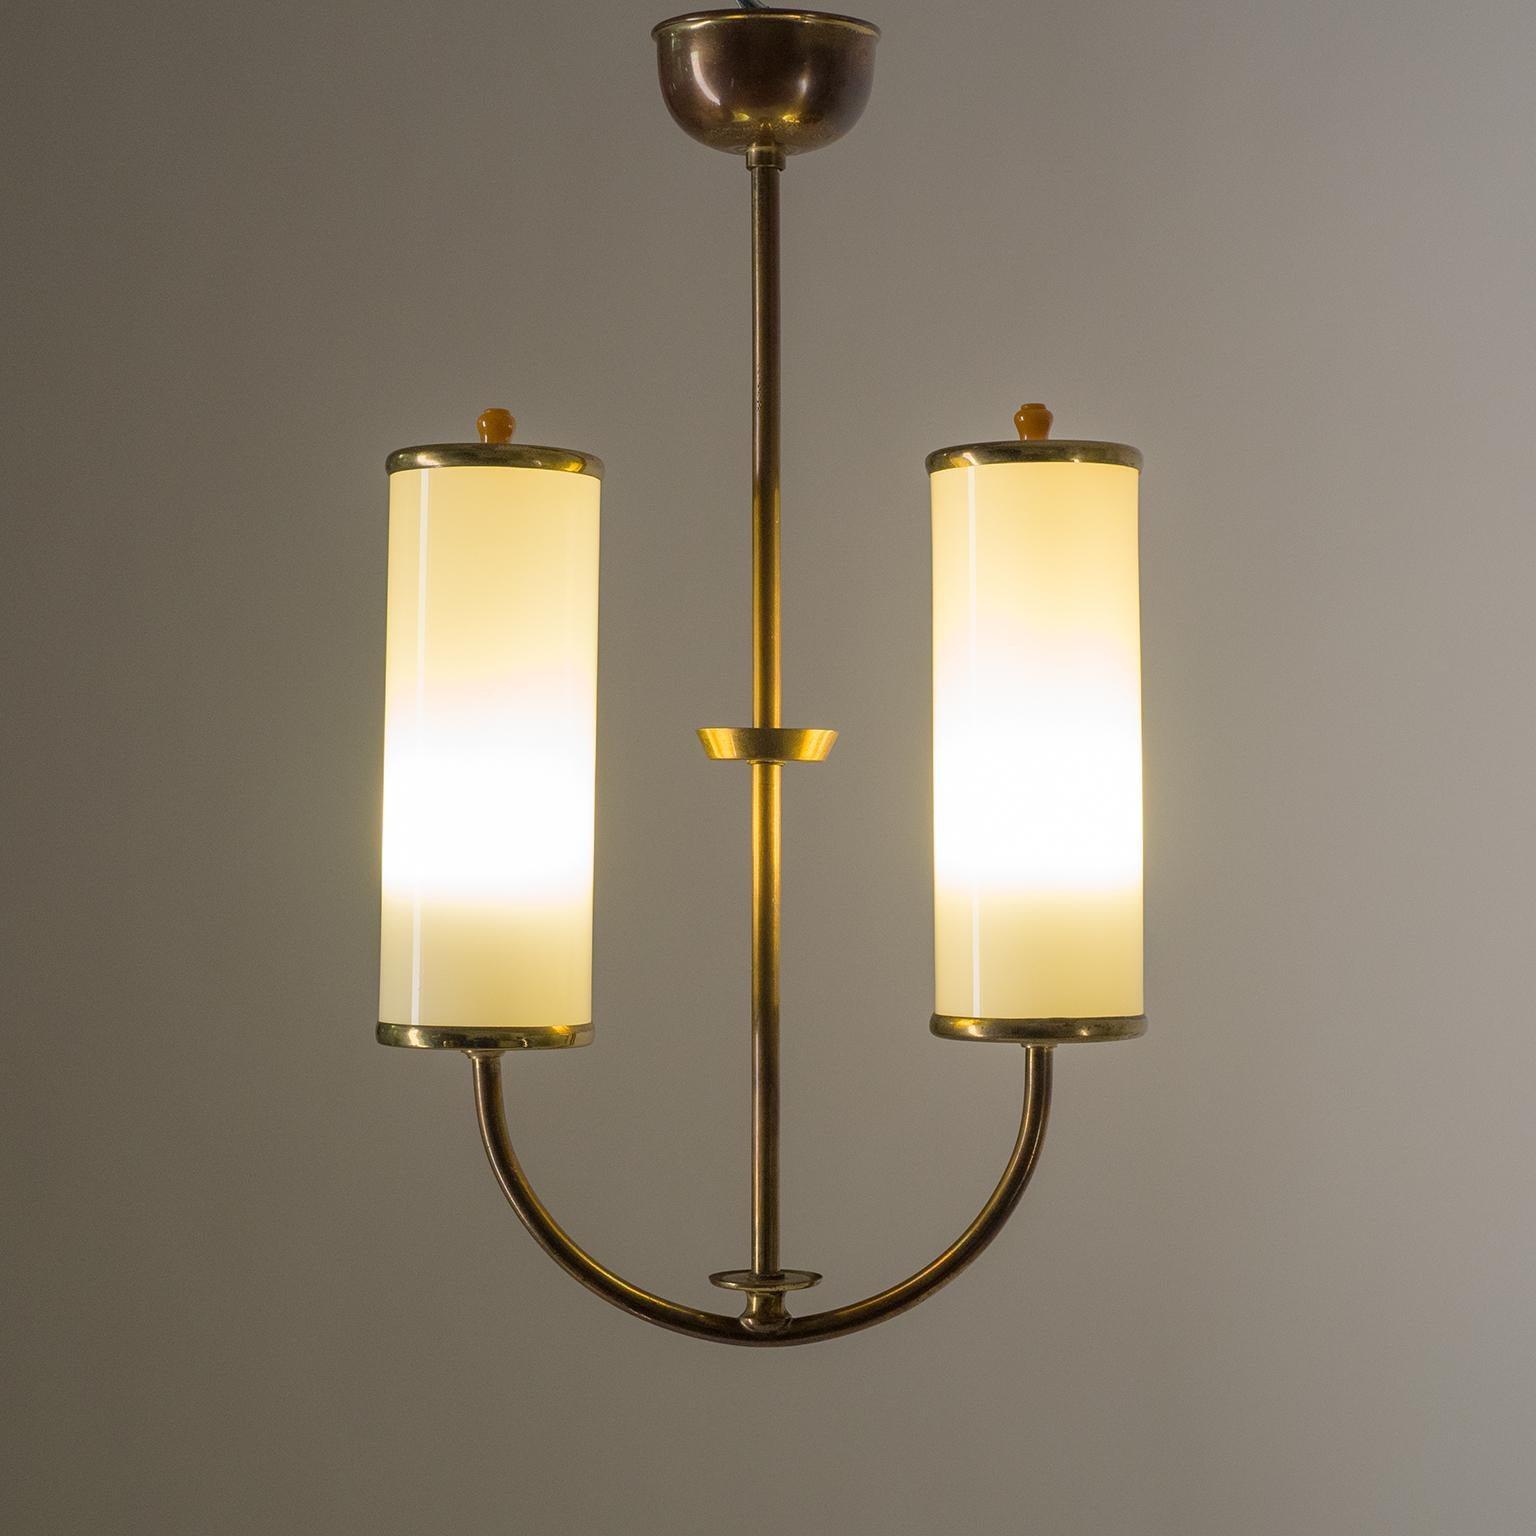 German Art Deco Chandelier, 1930s, Ivory Glass and Brass